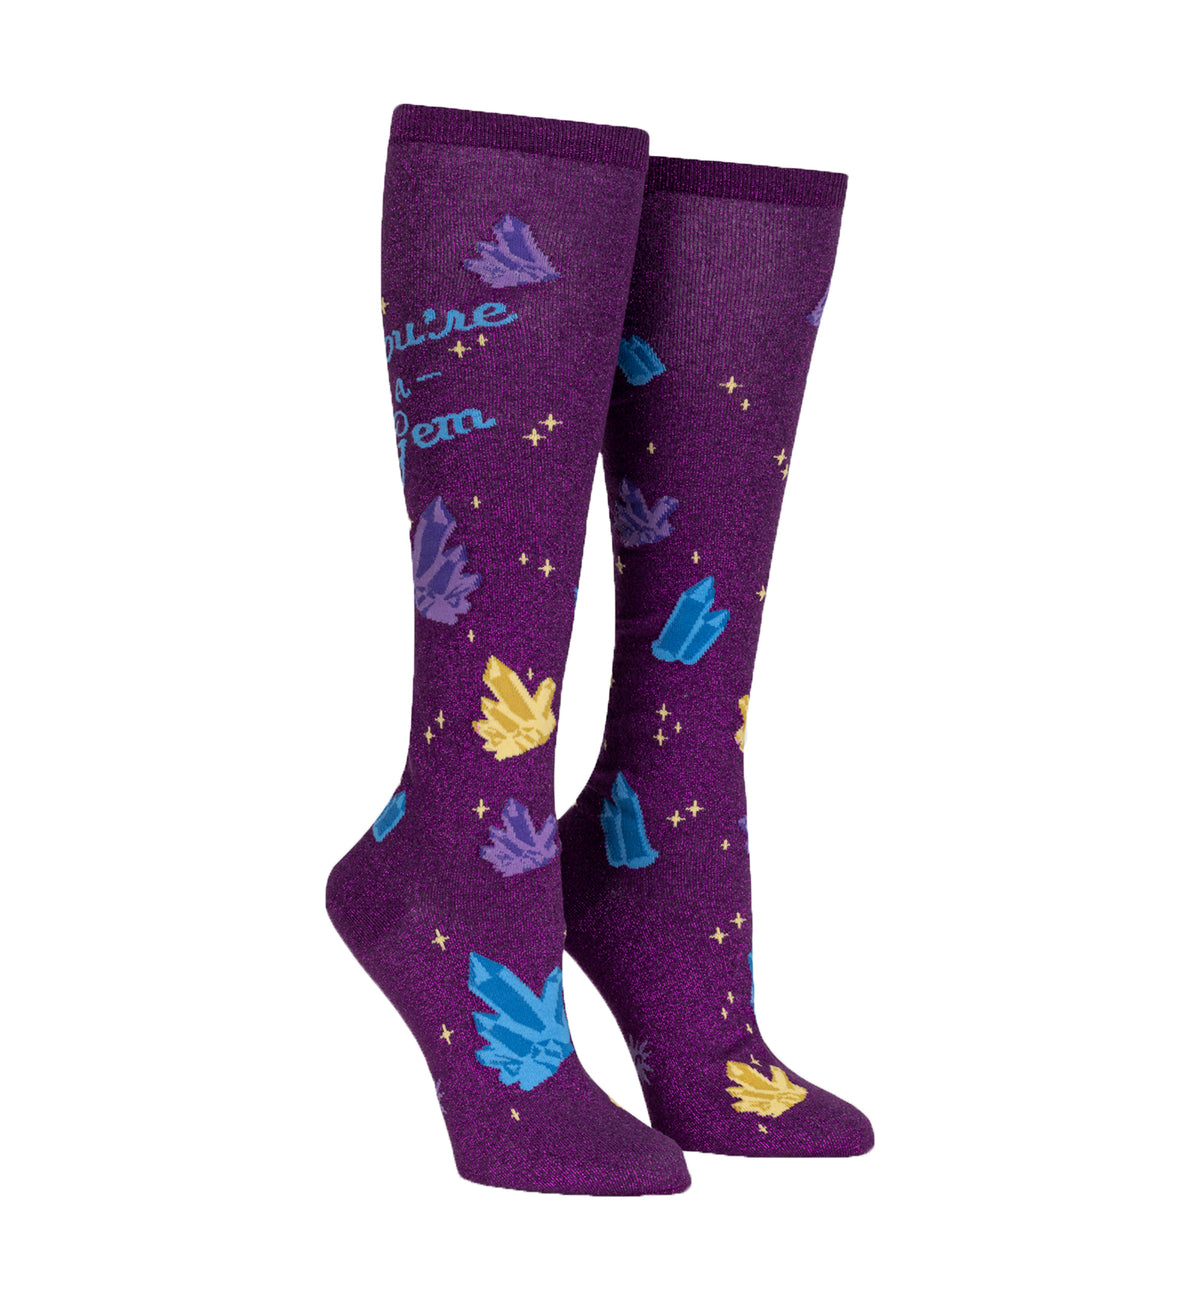 SOCK it to me Unisex Knee High Socks (F0637),You&#39;re a Gem - You&#39;re a Gem,One Size